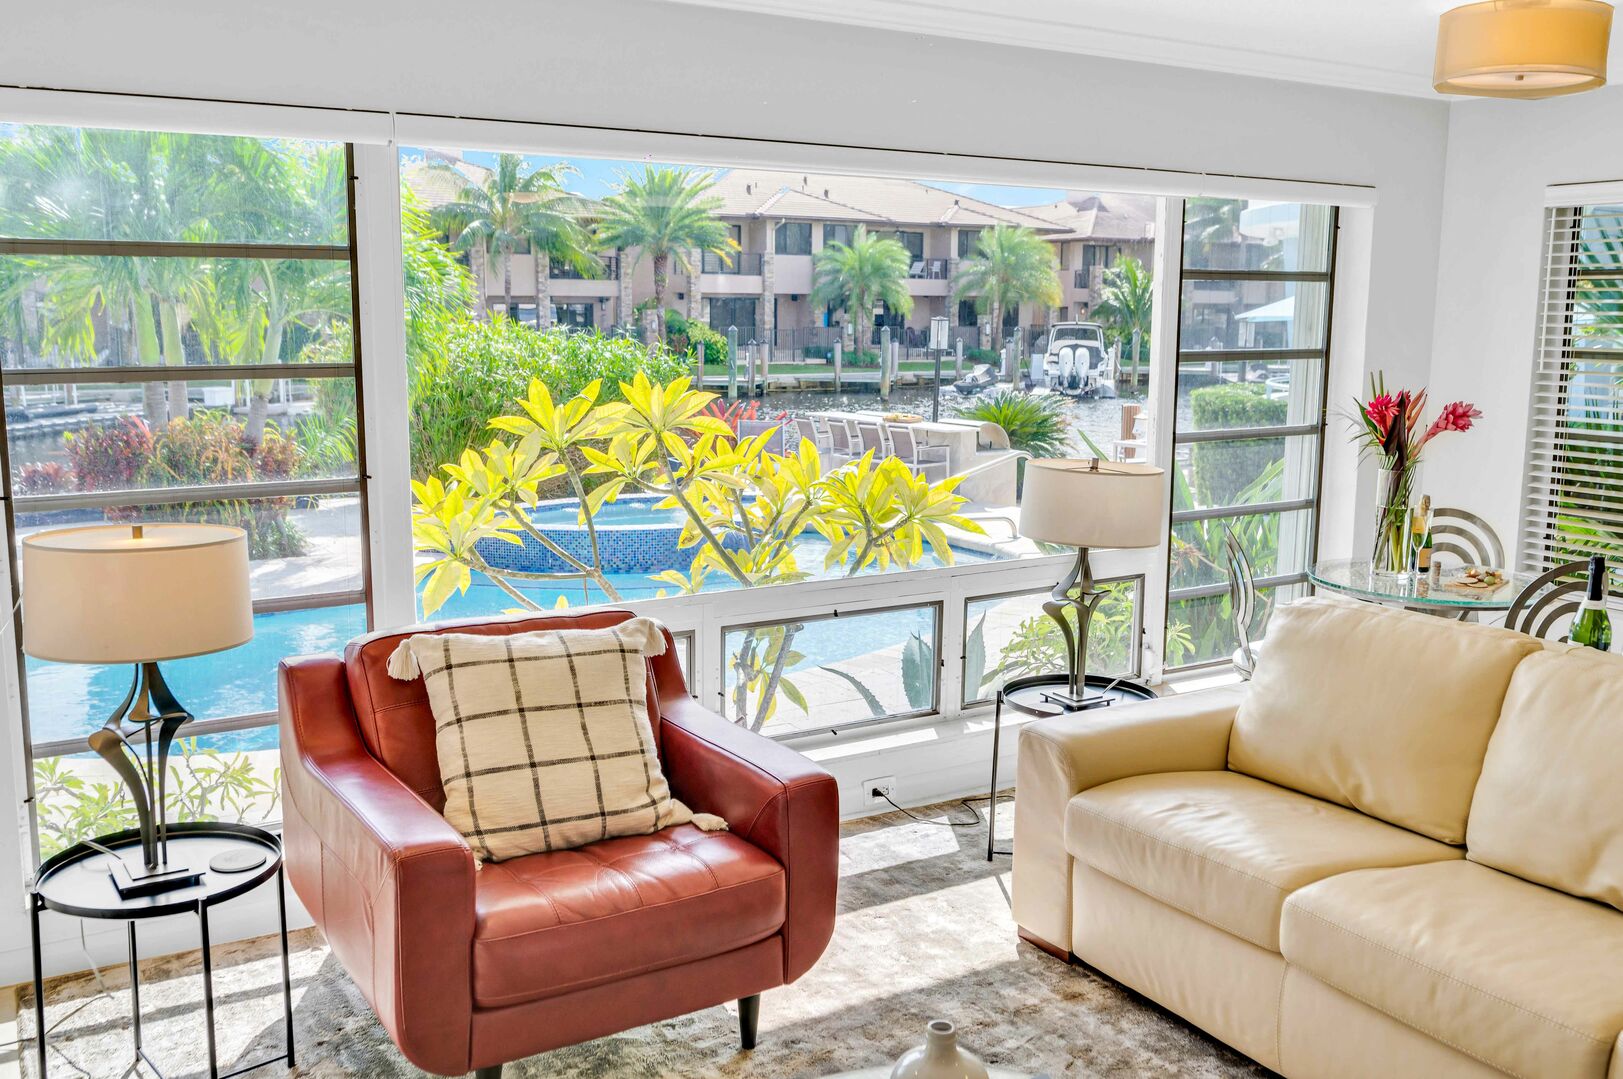 The living space has a large glass window overlooking the pool